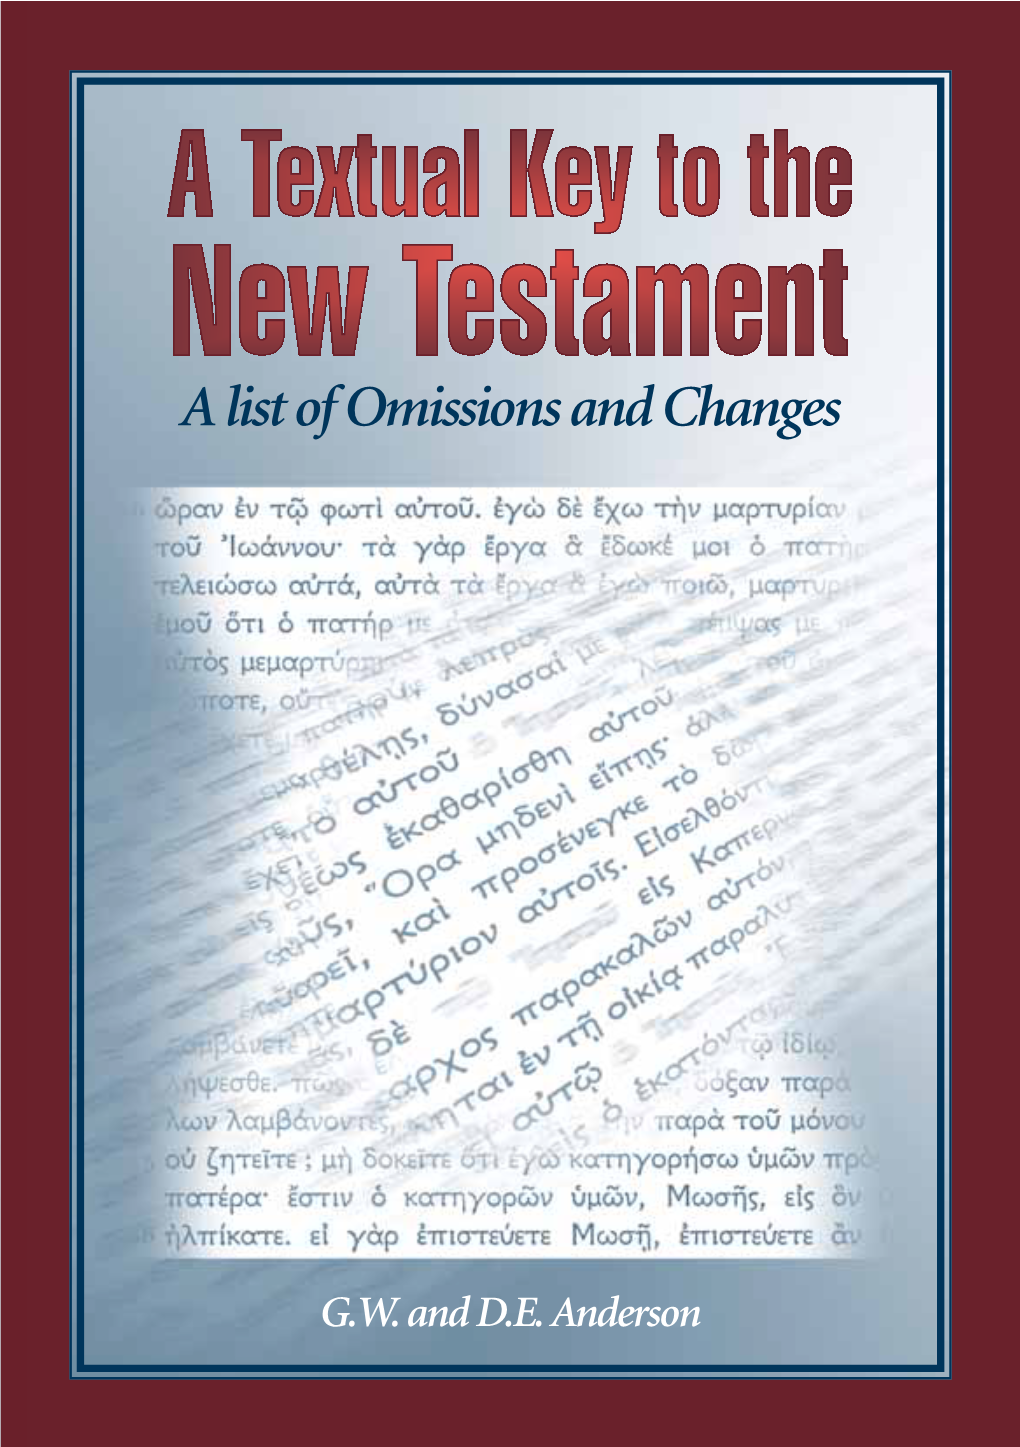 A Textual Key to the New Testament a List of Omissions and Changes Copyright © 1993, 2002 Trinitarian Bible Society G